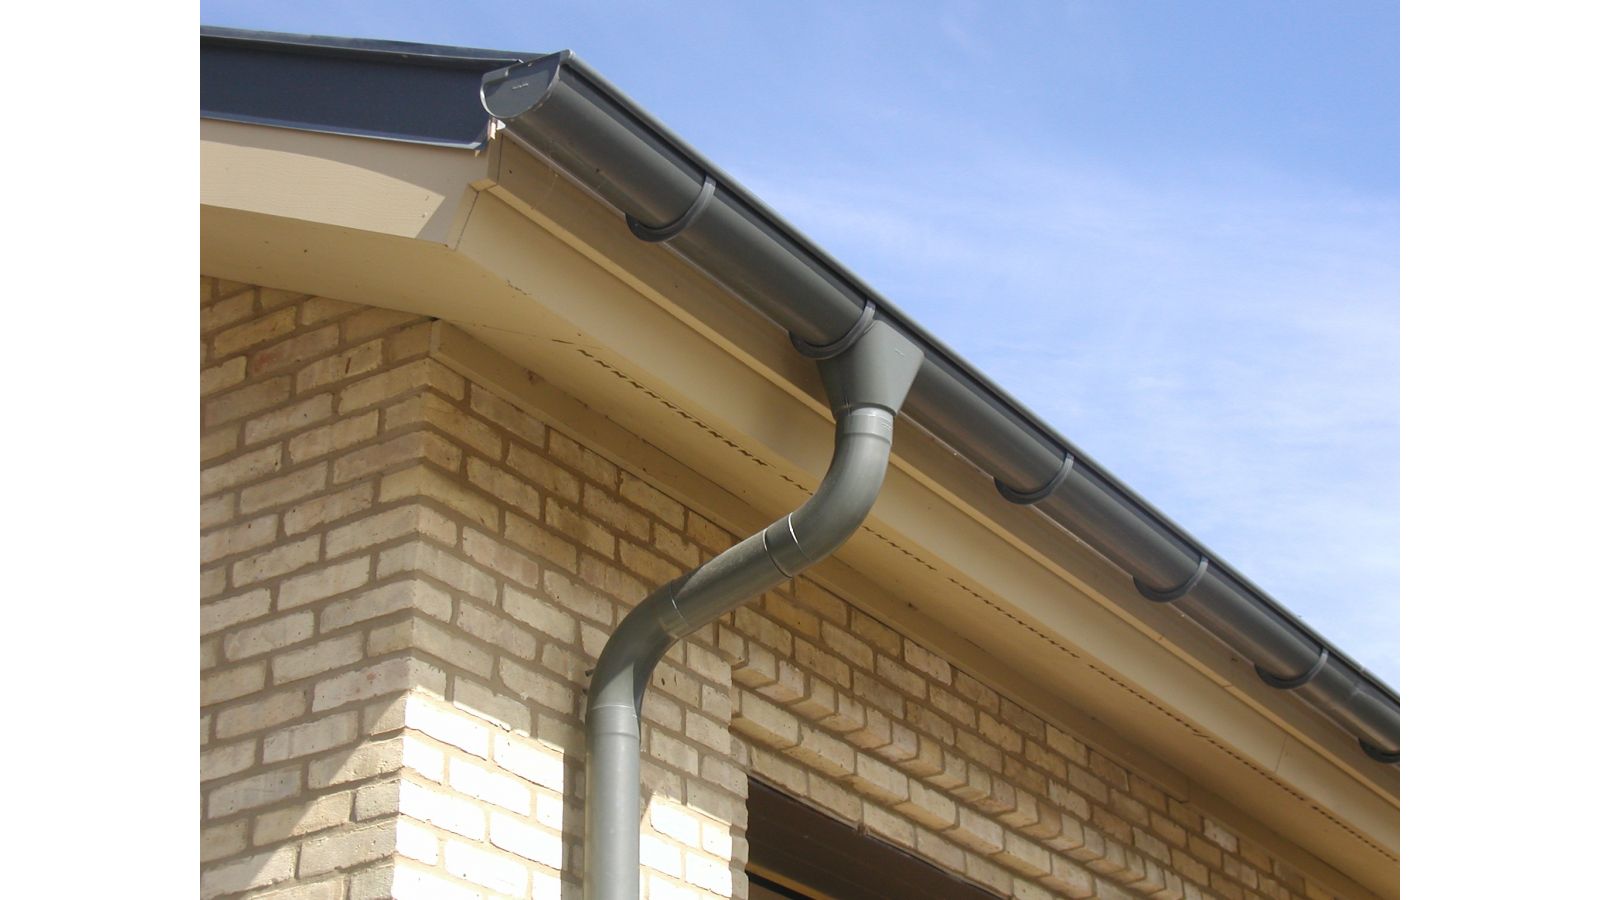 RHEINZINK\'s Zinc Downspouts and Rainwater Products Support Effective Roof Drainage with Stylish Appeal